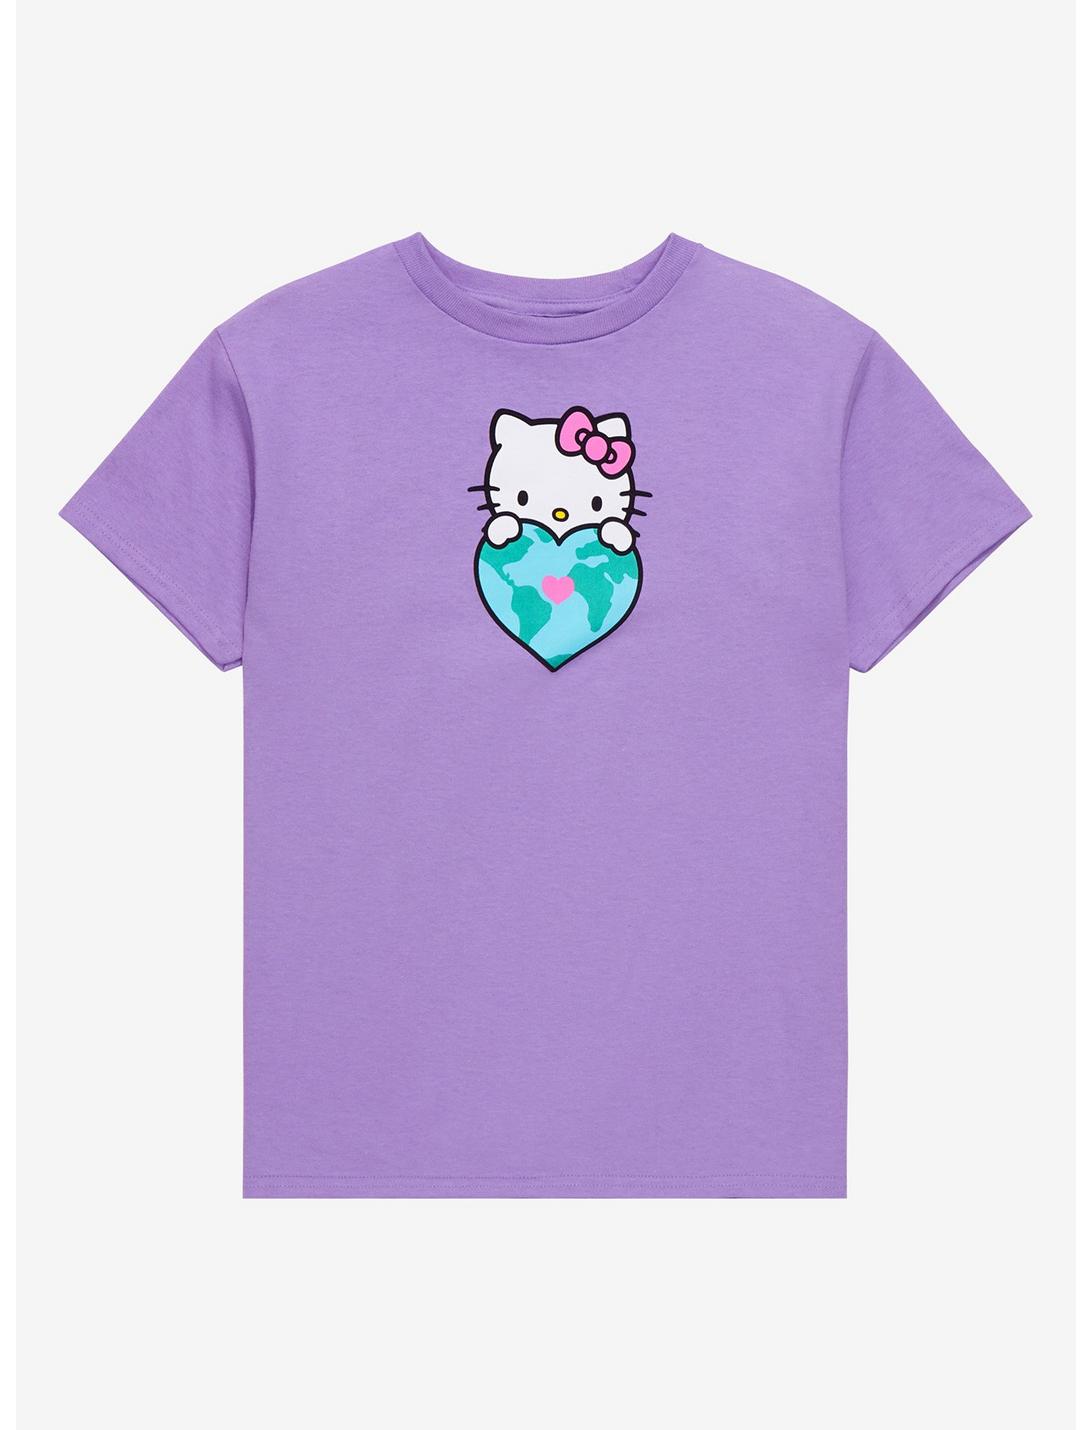 Sanrio Hello Kitty Heart Globe Youth T-Shirt - BoxLunch Exclusive, LIGHT PURPLE, hi-res